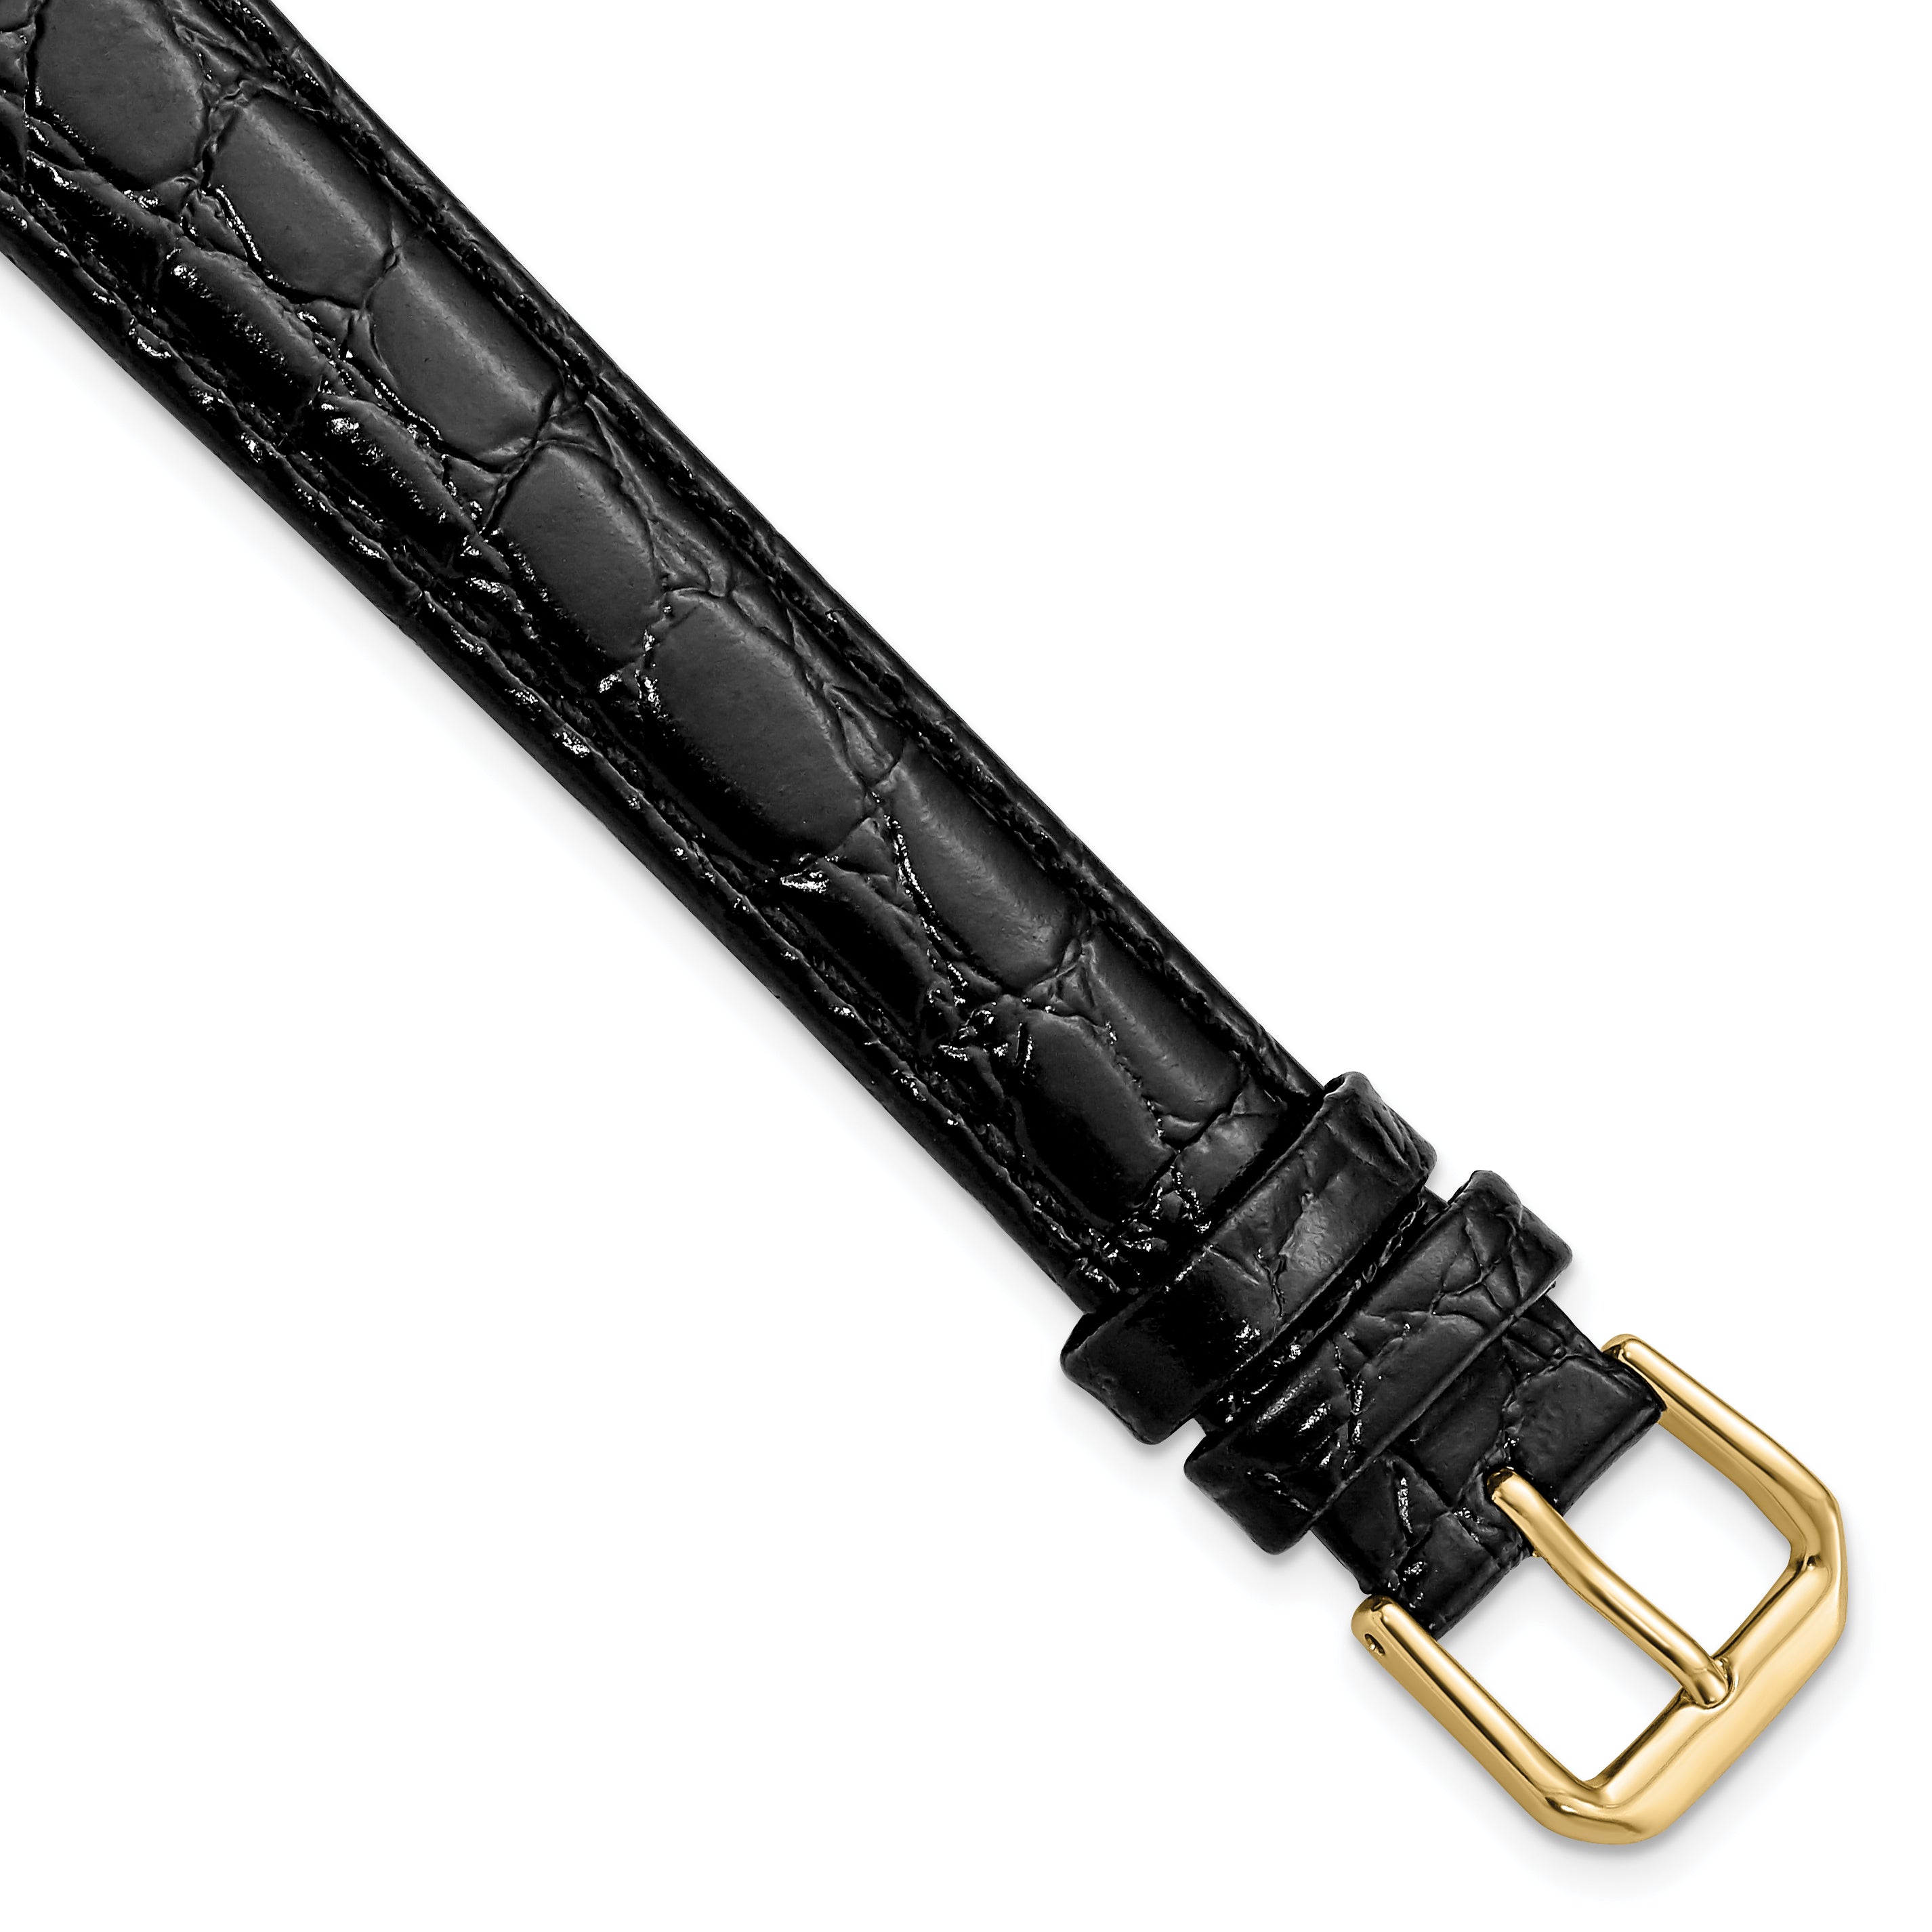 DeBeer 16mm Extra Long Black Alligator Grain Leather with Gold-tone Buckle 9.5 inch Watch Band